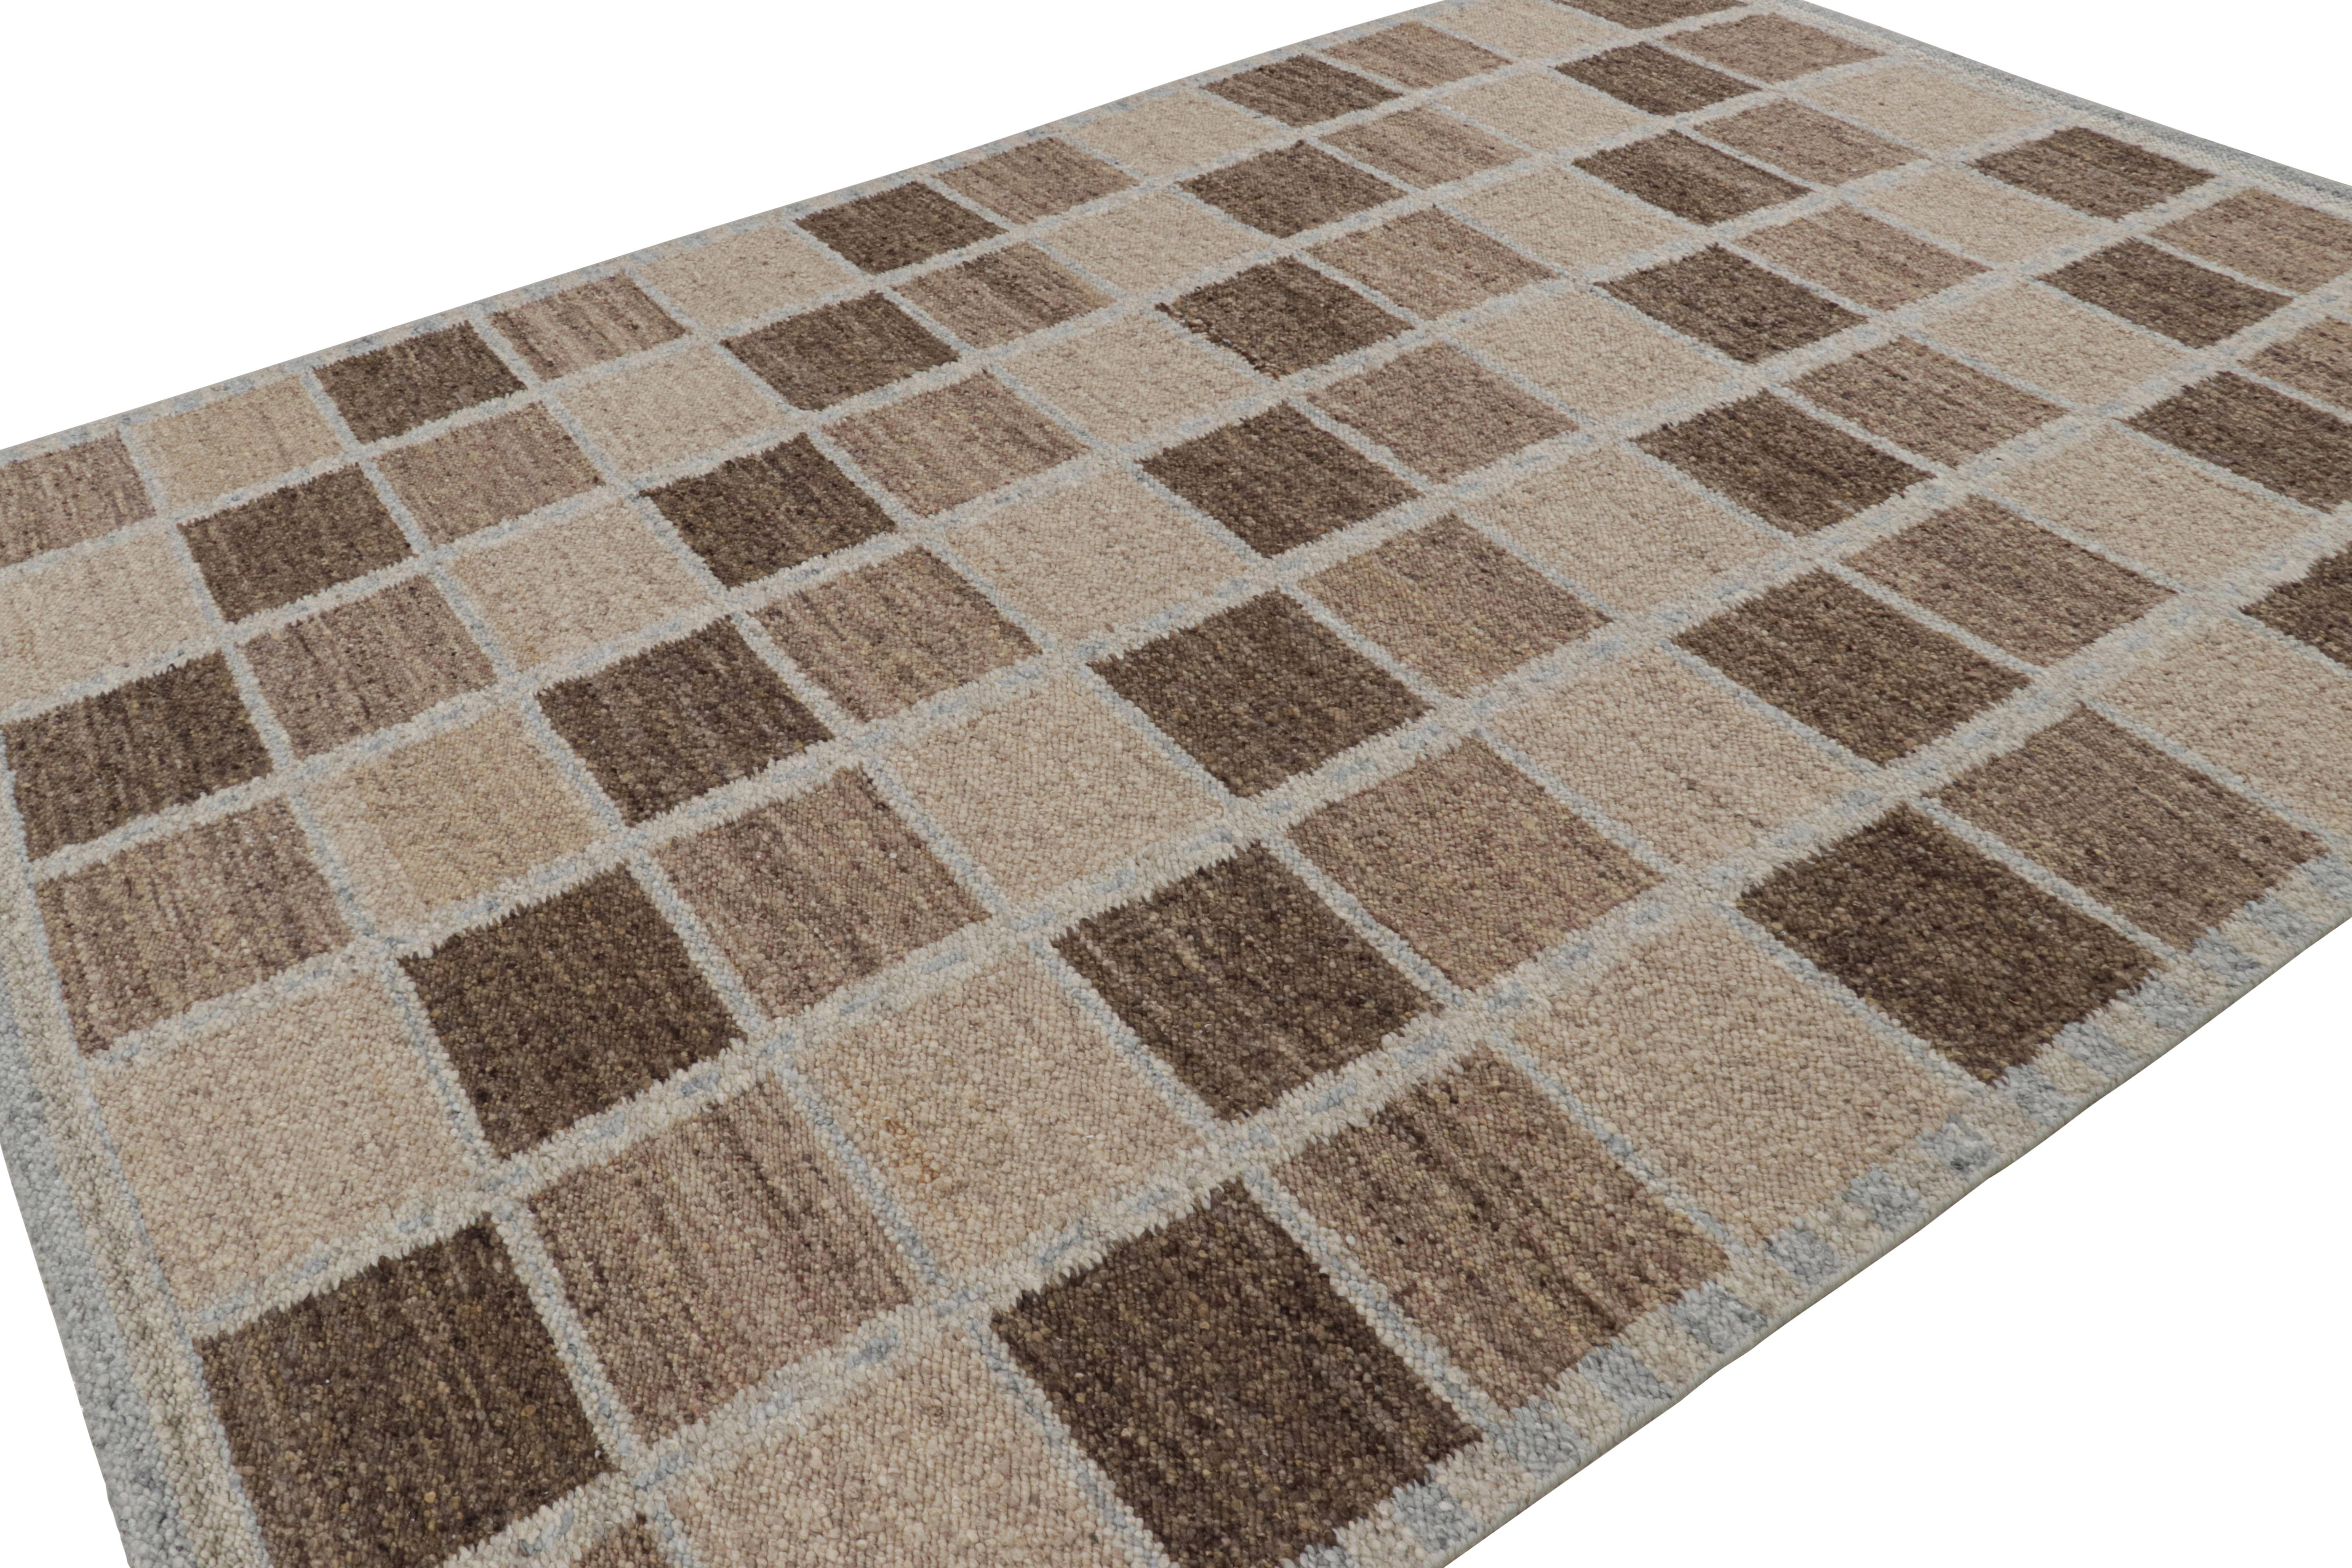 Indian Rug & Kilim’s Scandinavian Style Rug with Beige-Brown Geometric Patterns For Sale